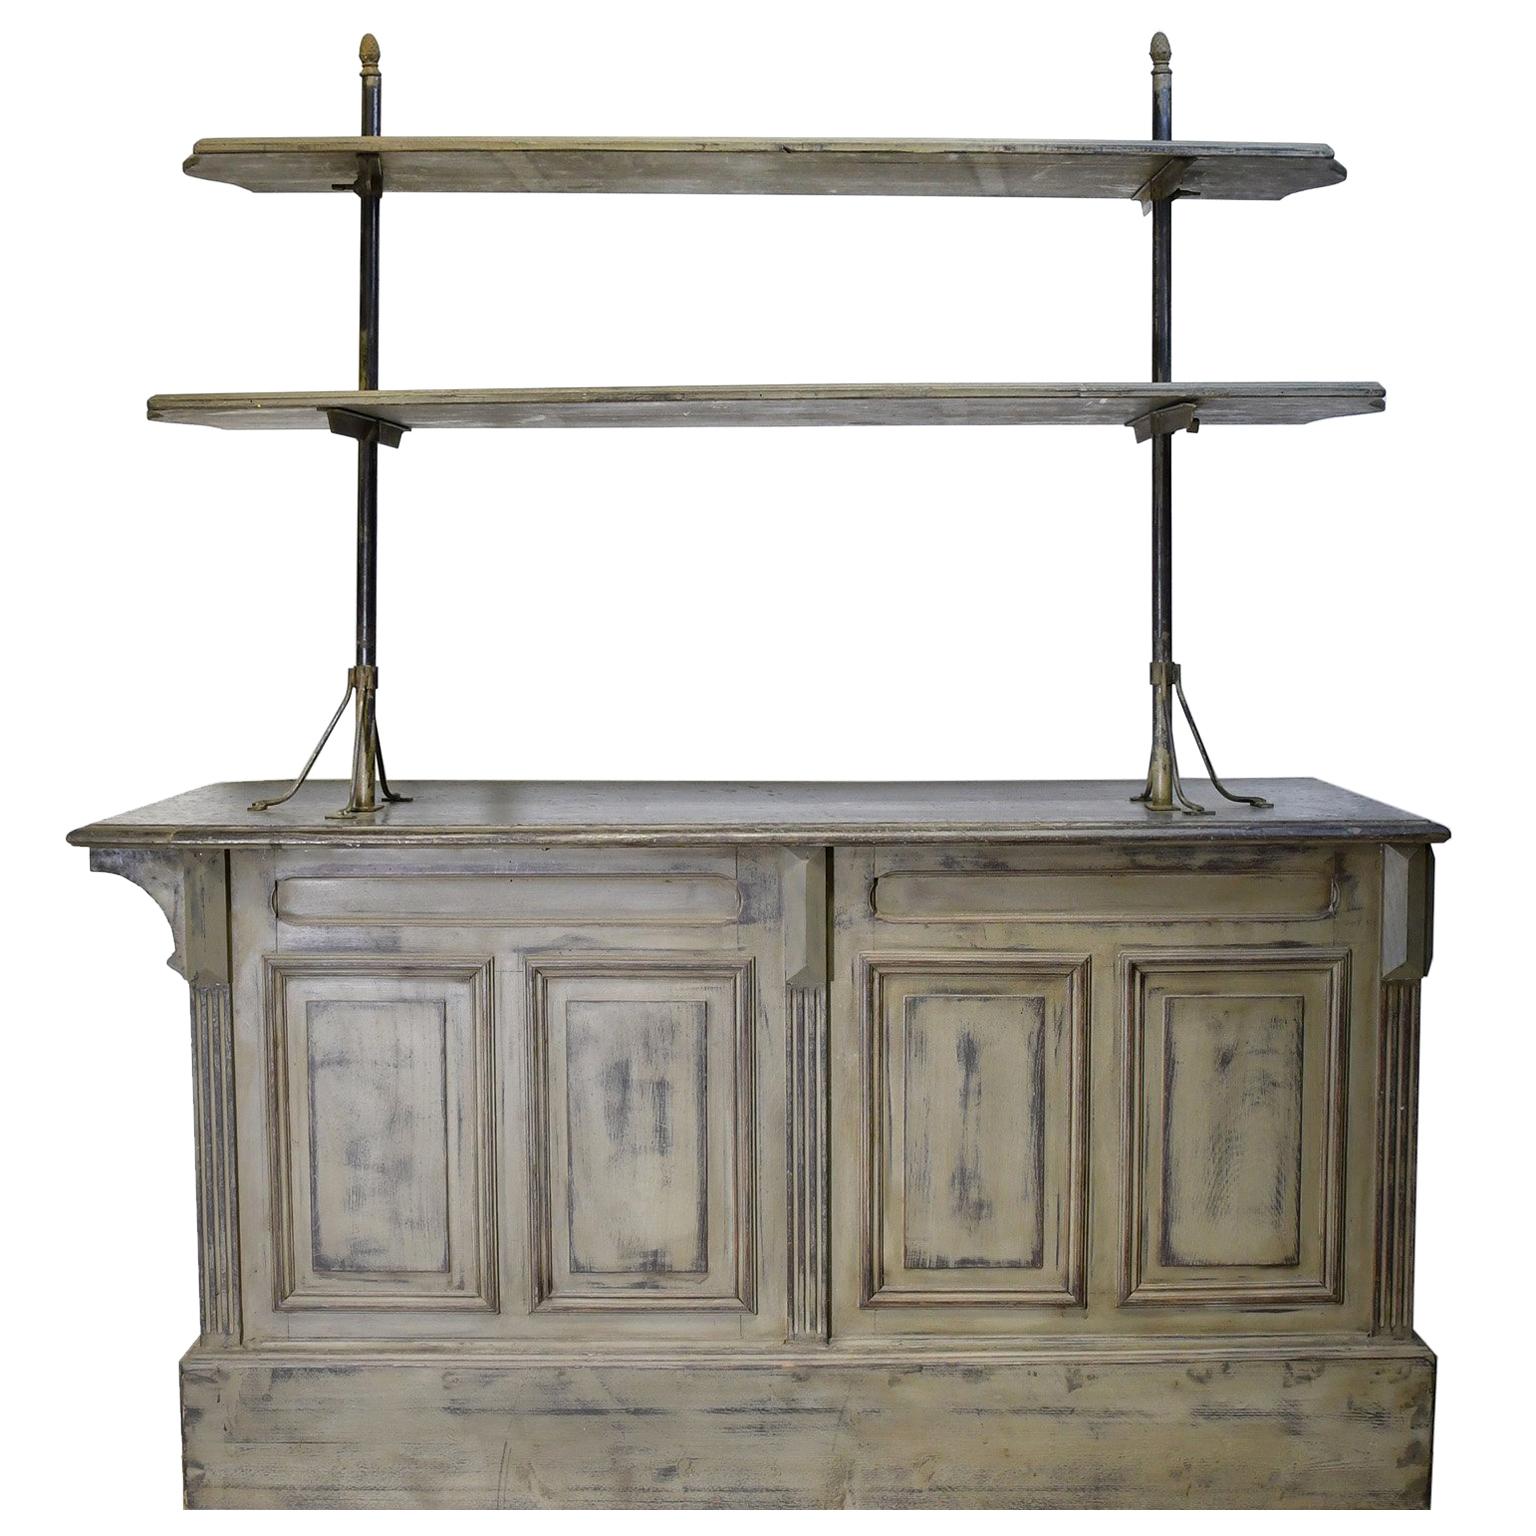 Painted Antique Victorian Store Counter with Zinc Top, England, circa 1880